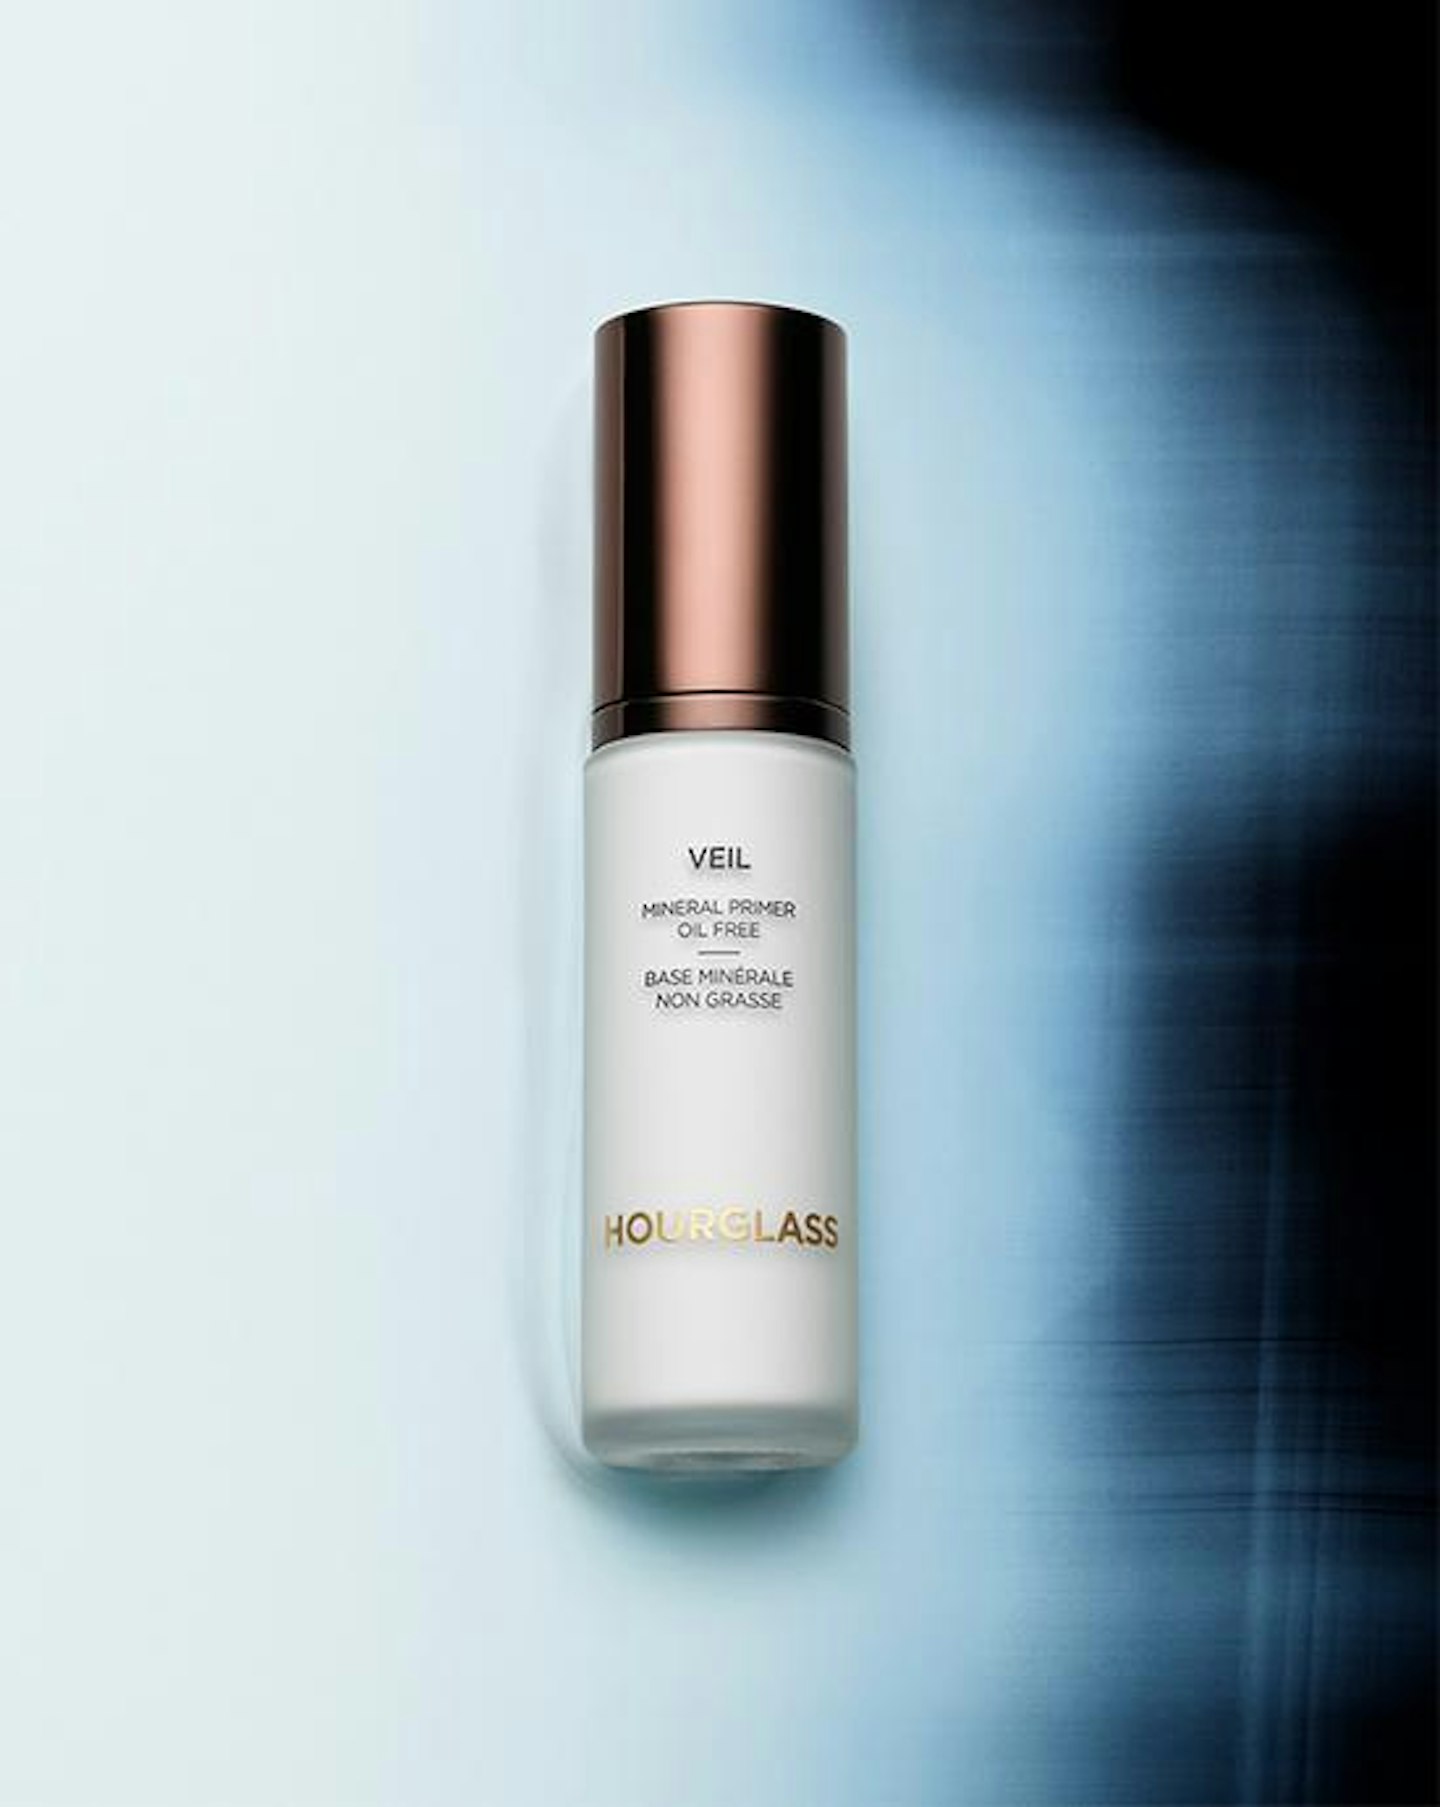 Hourglass, Veil Mineral Primer SPF 15, from £18